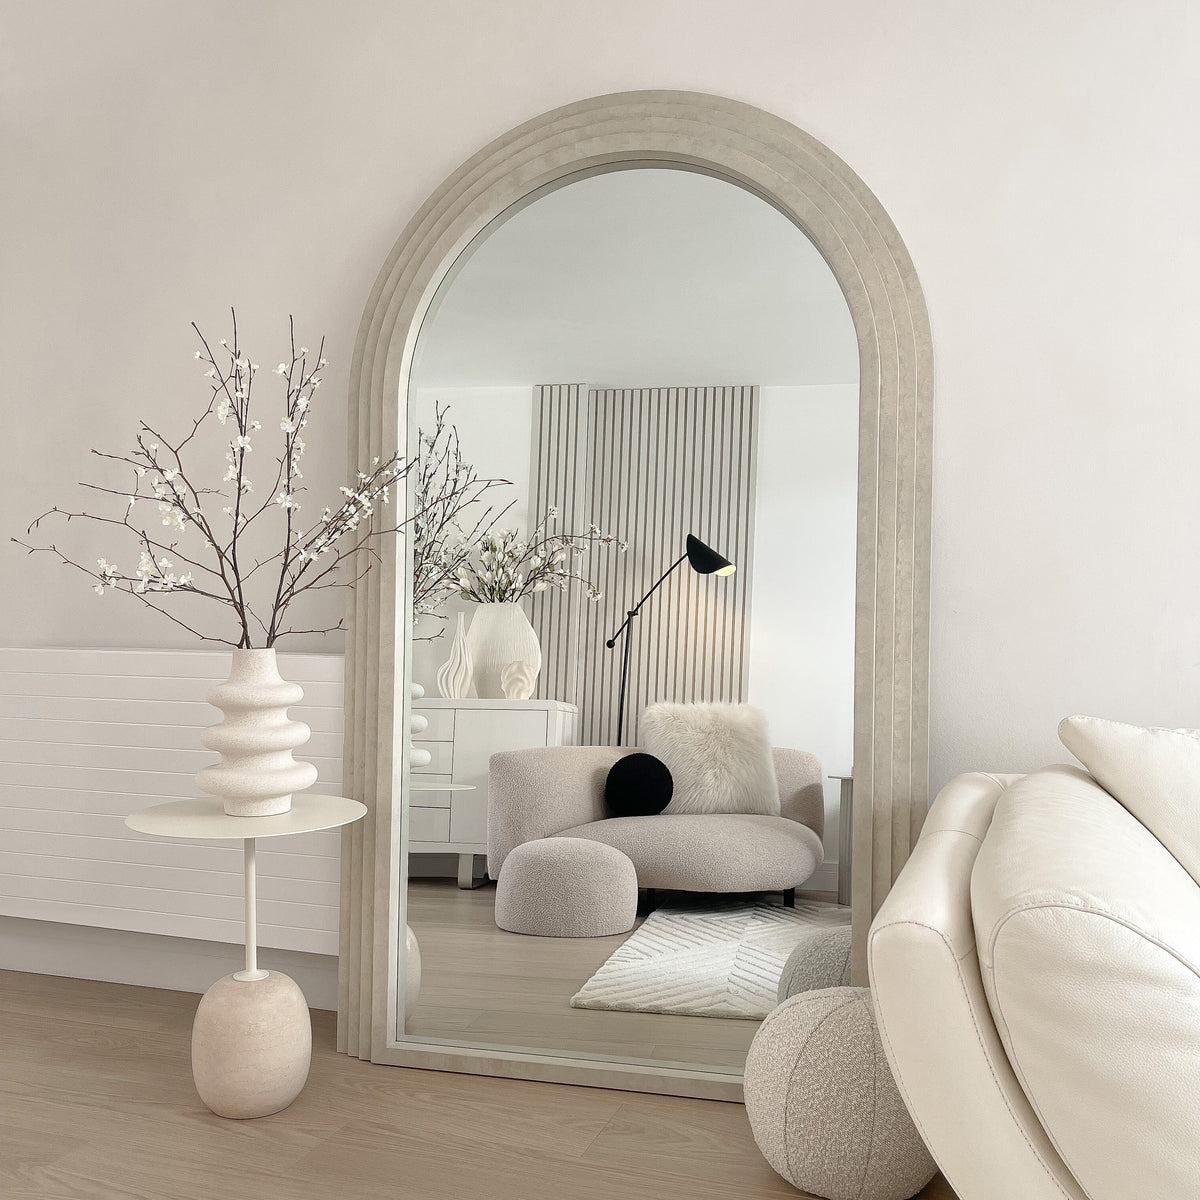 Full Length Arched Concrete Mirror in living room